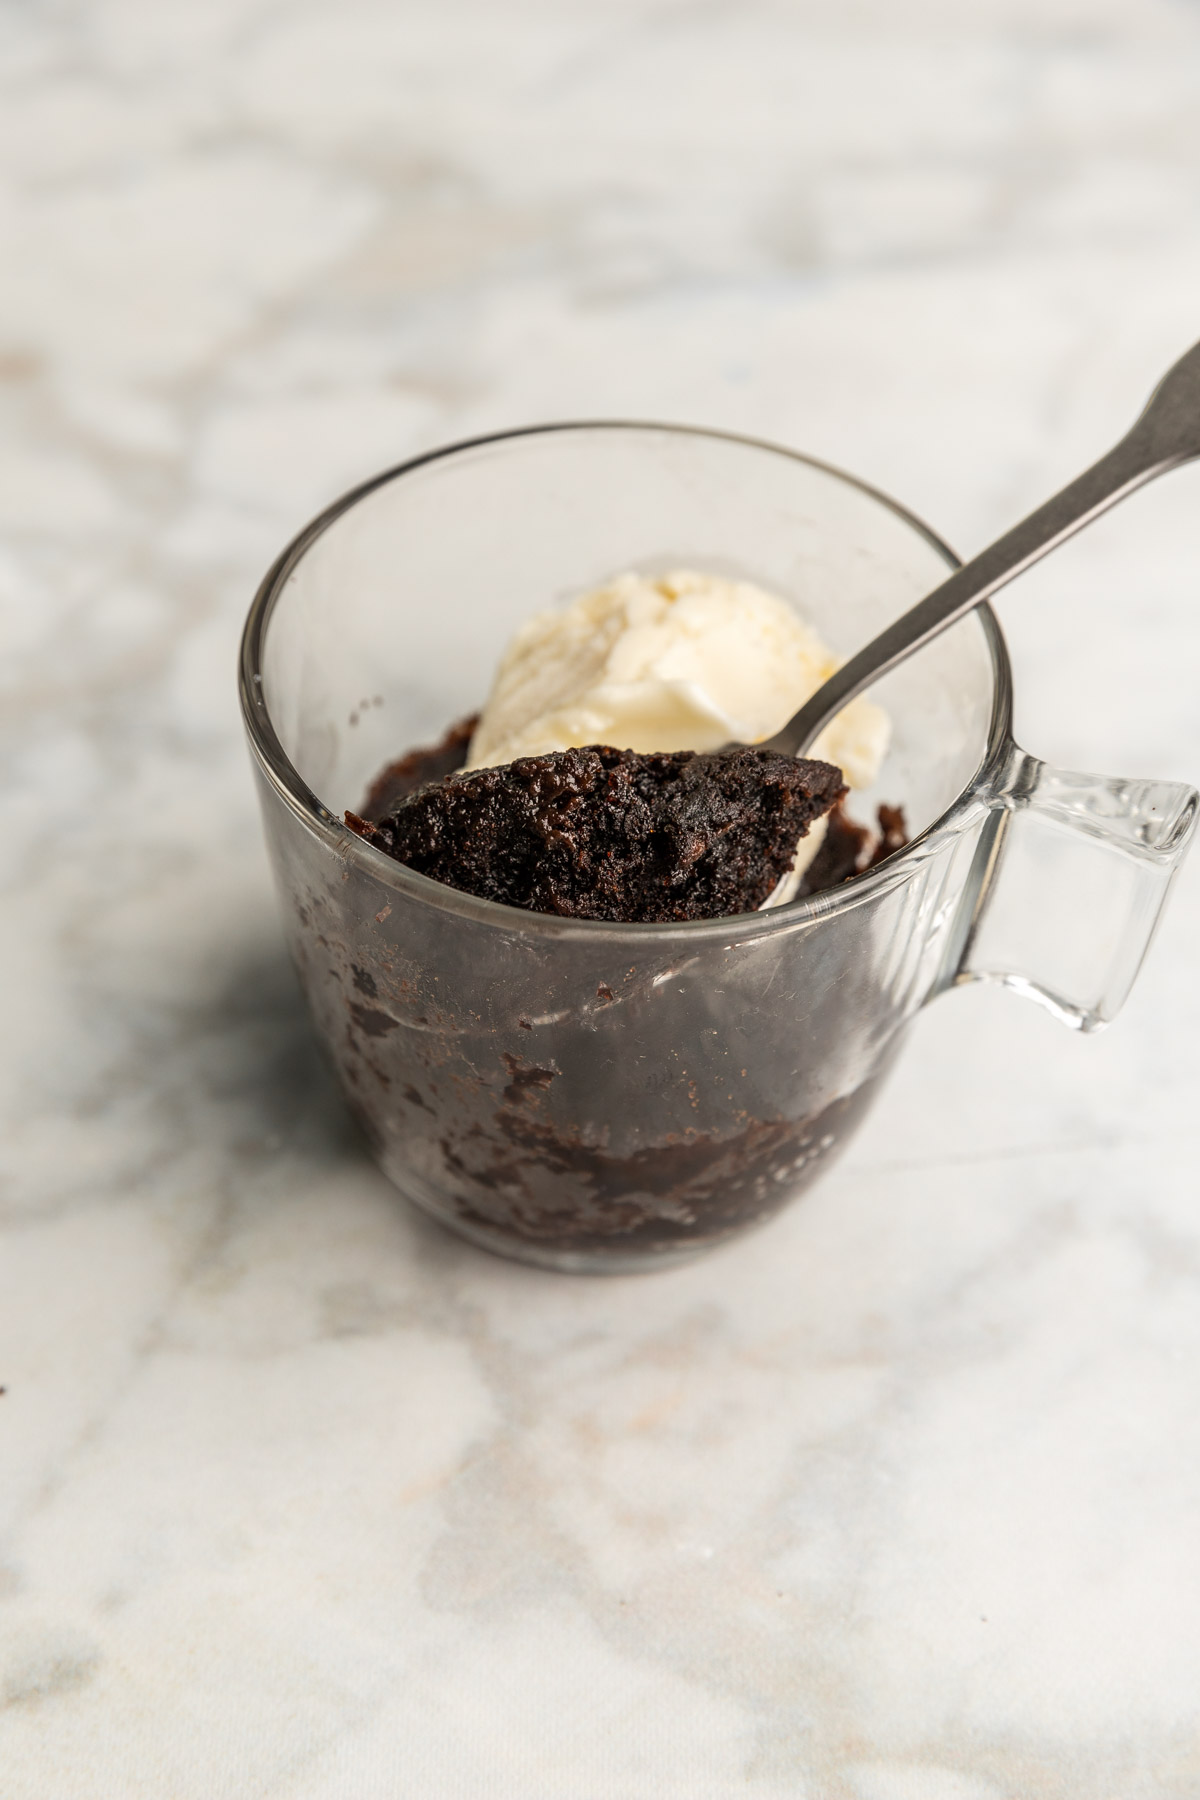 Spoon scooping out some Oreo microwave mug cake.